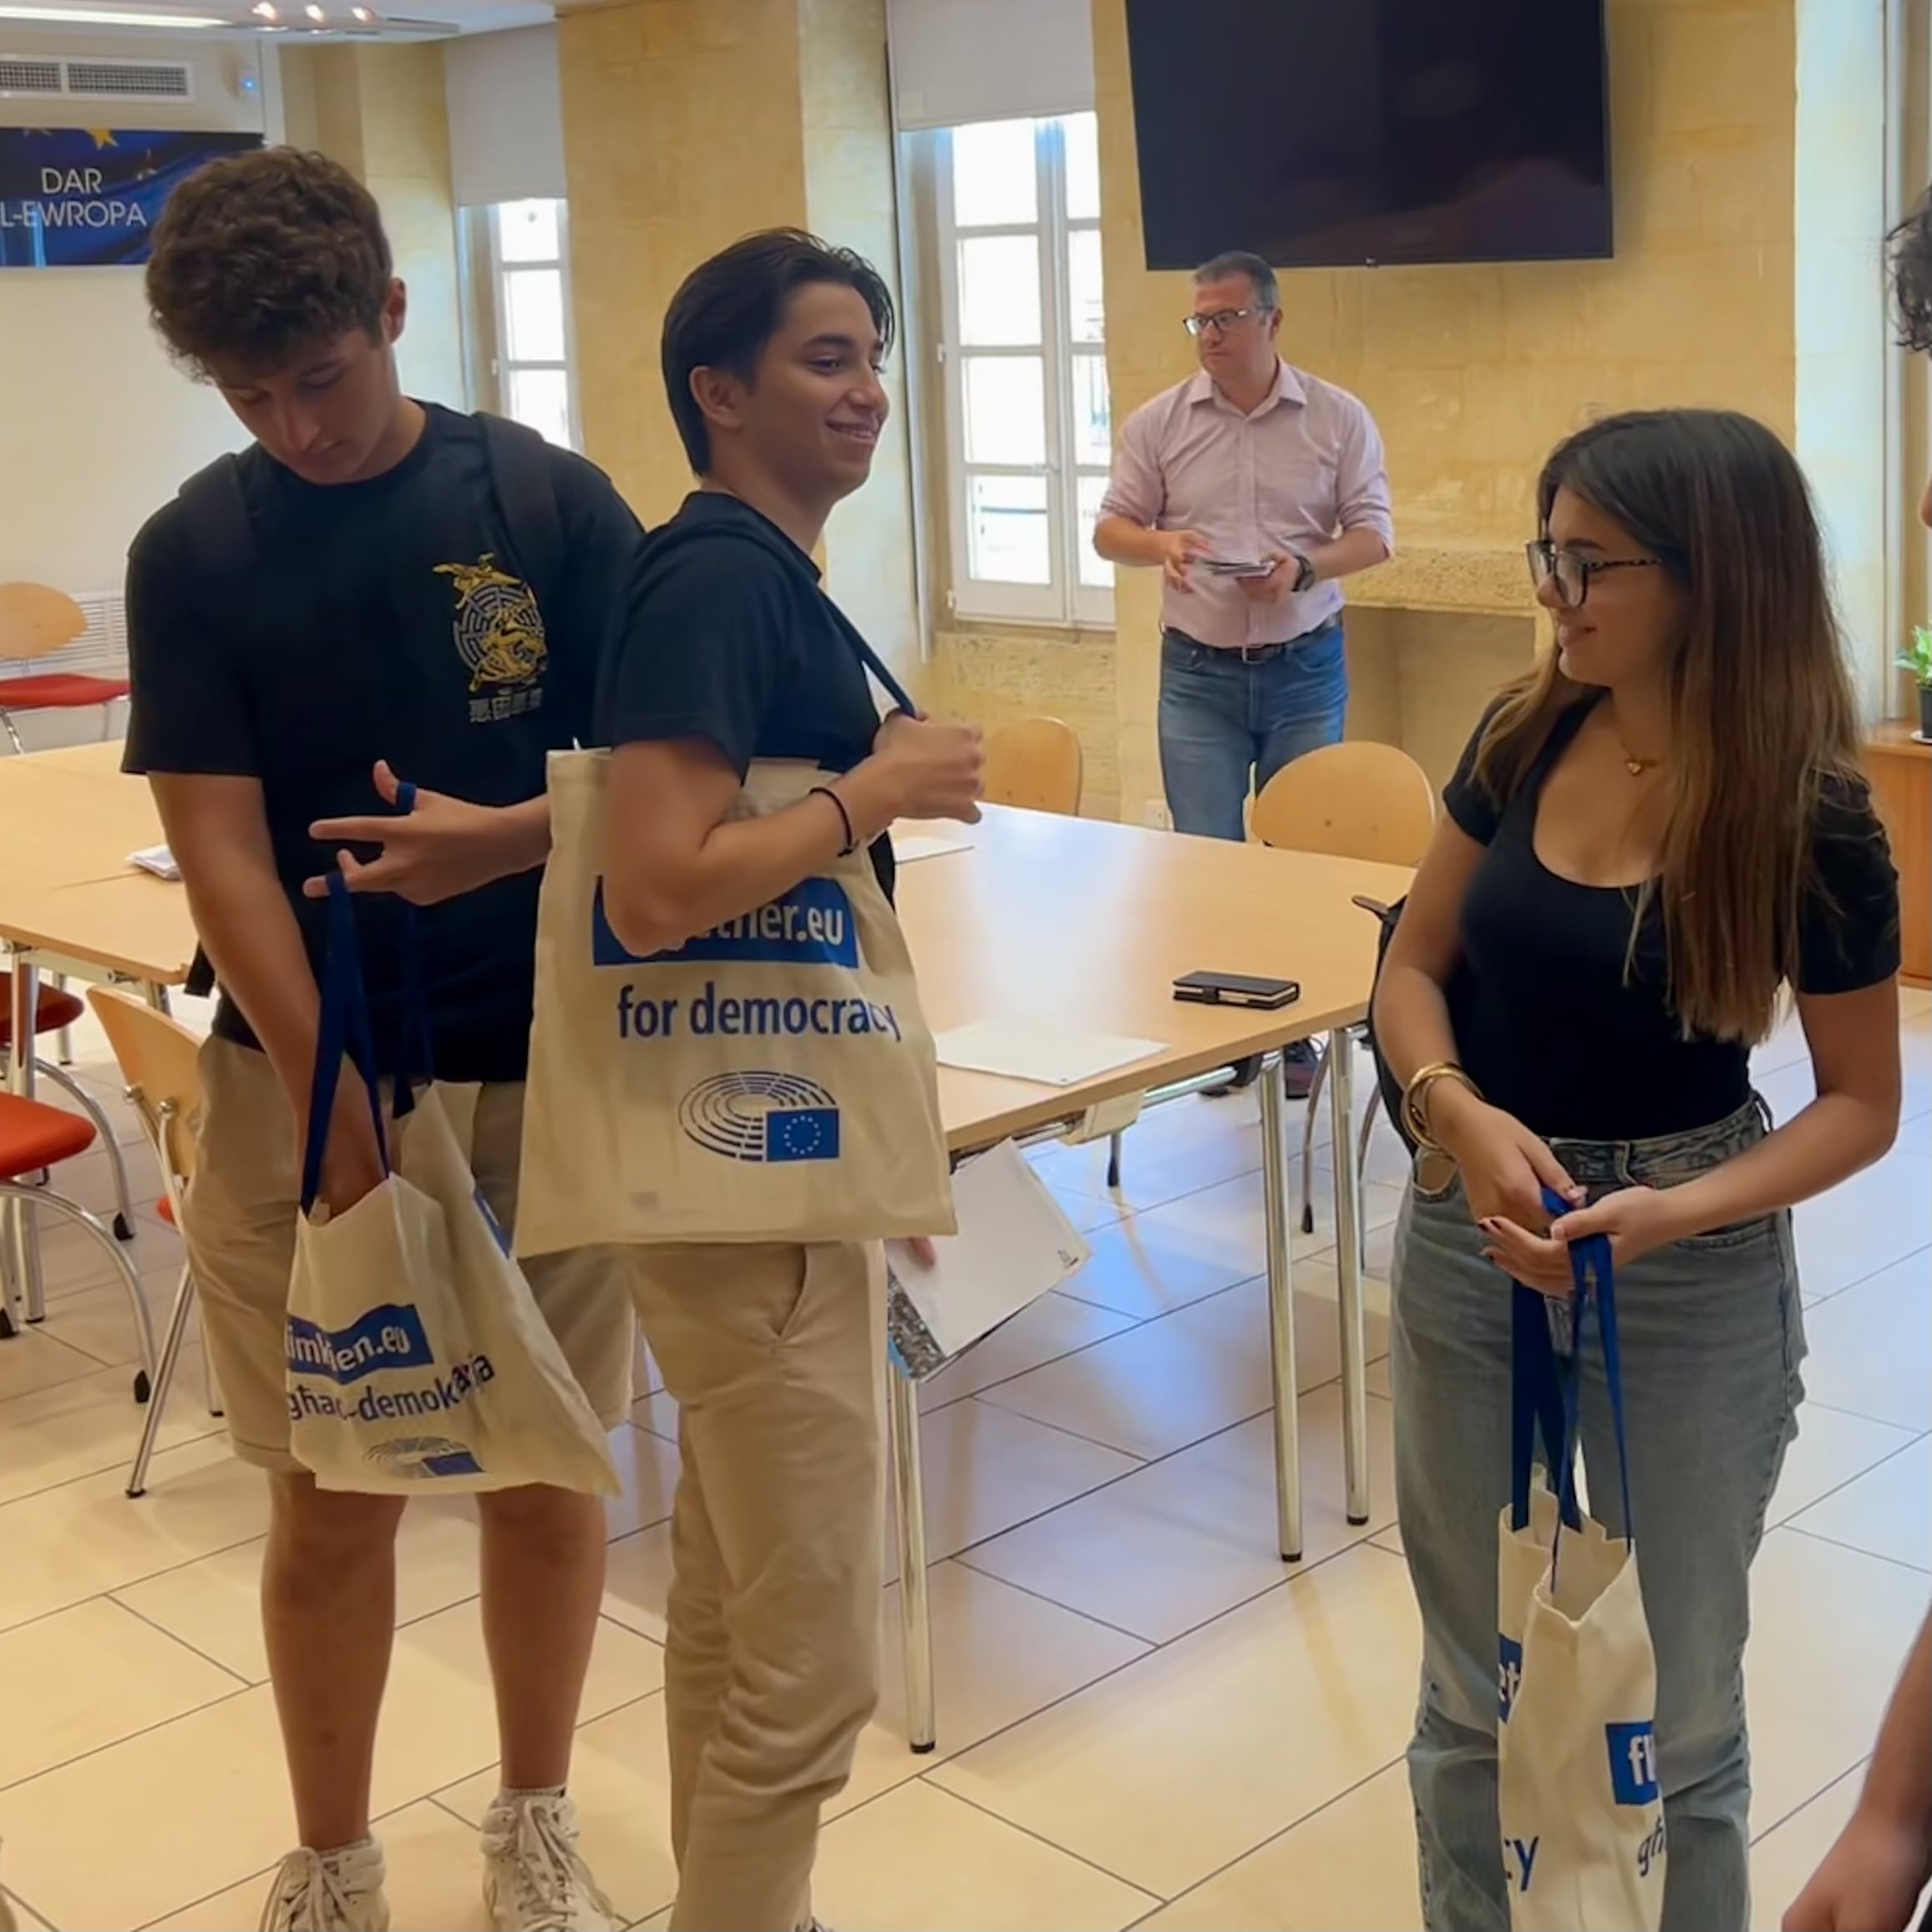 Students getting their together.eu freebies at Europe House in Valletta